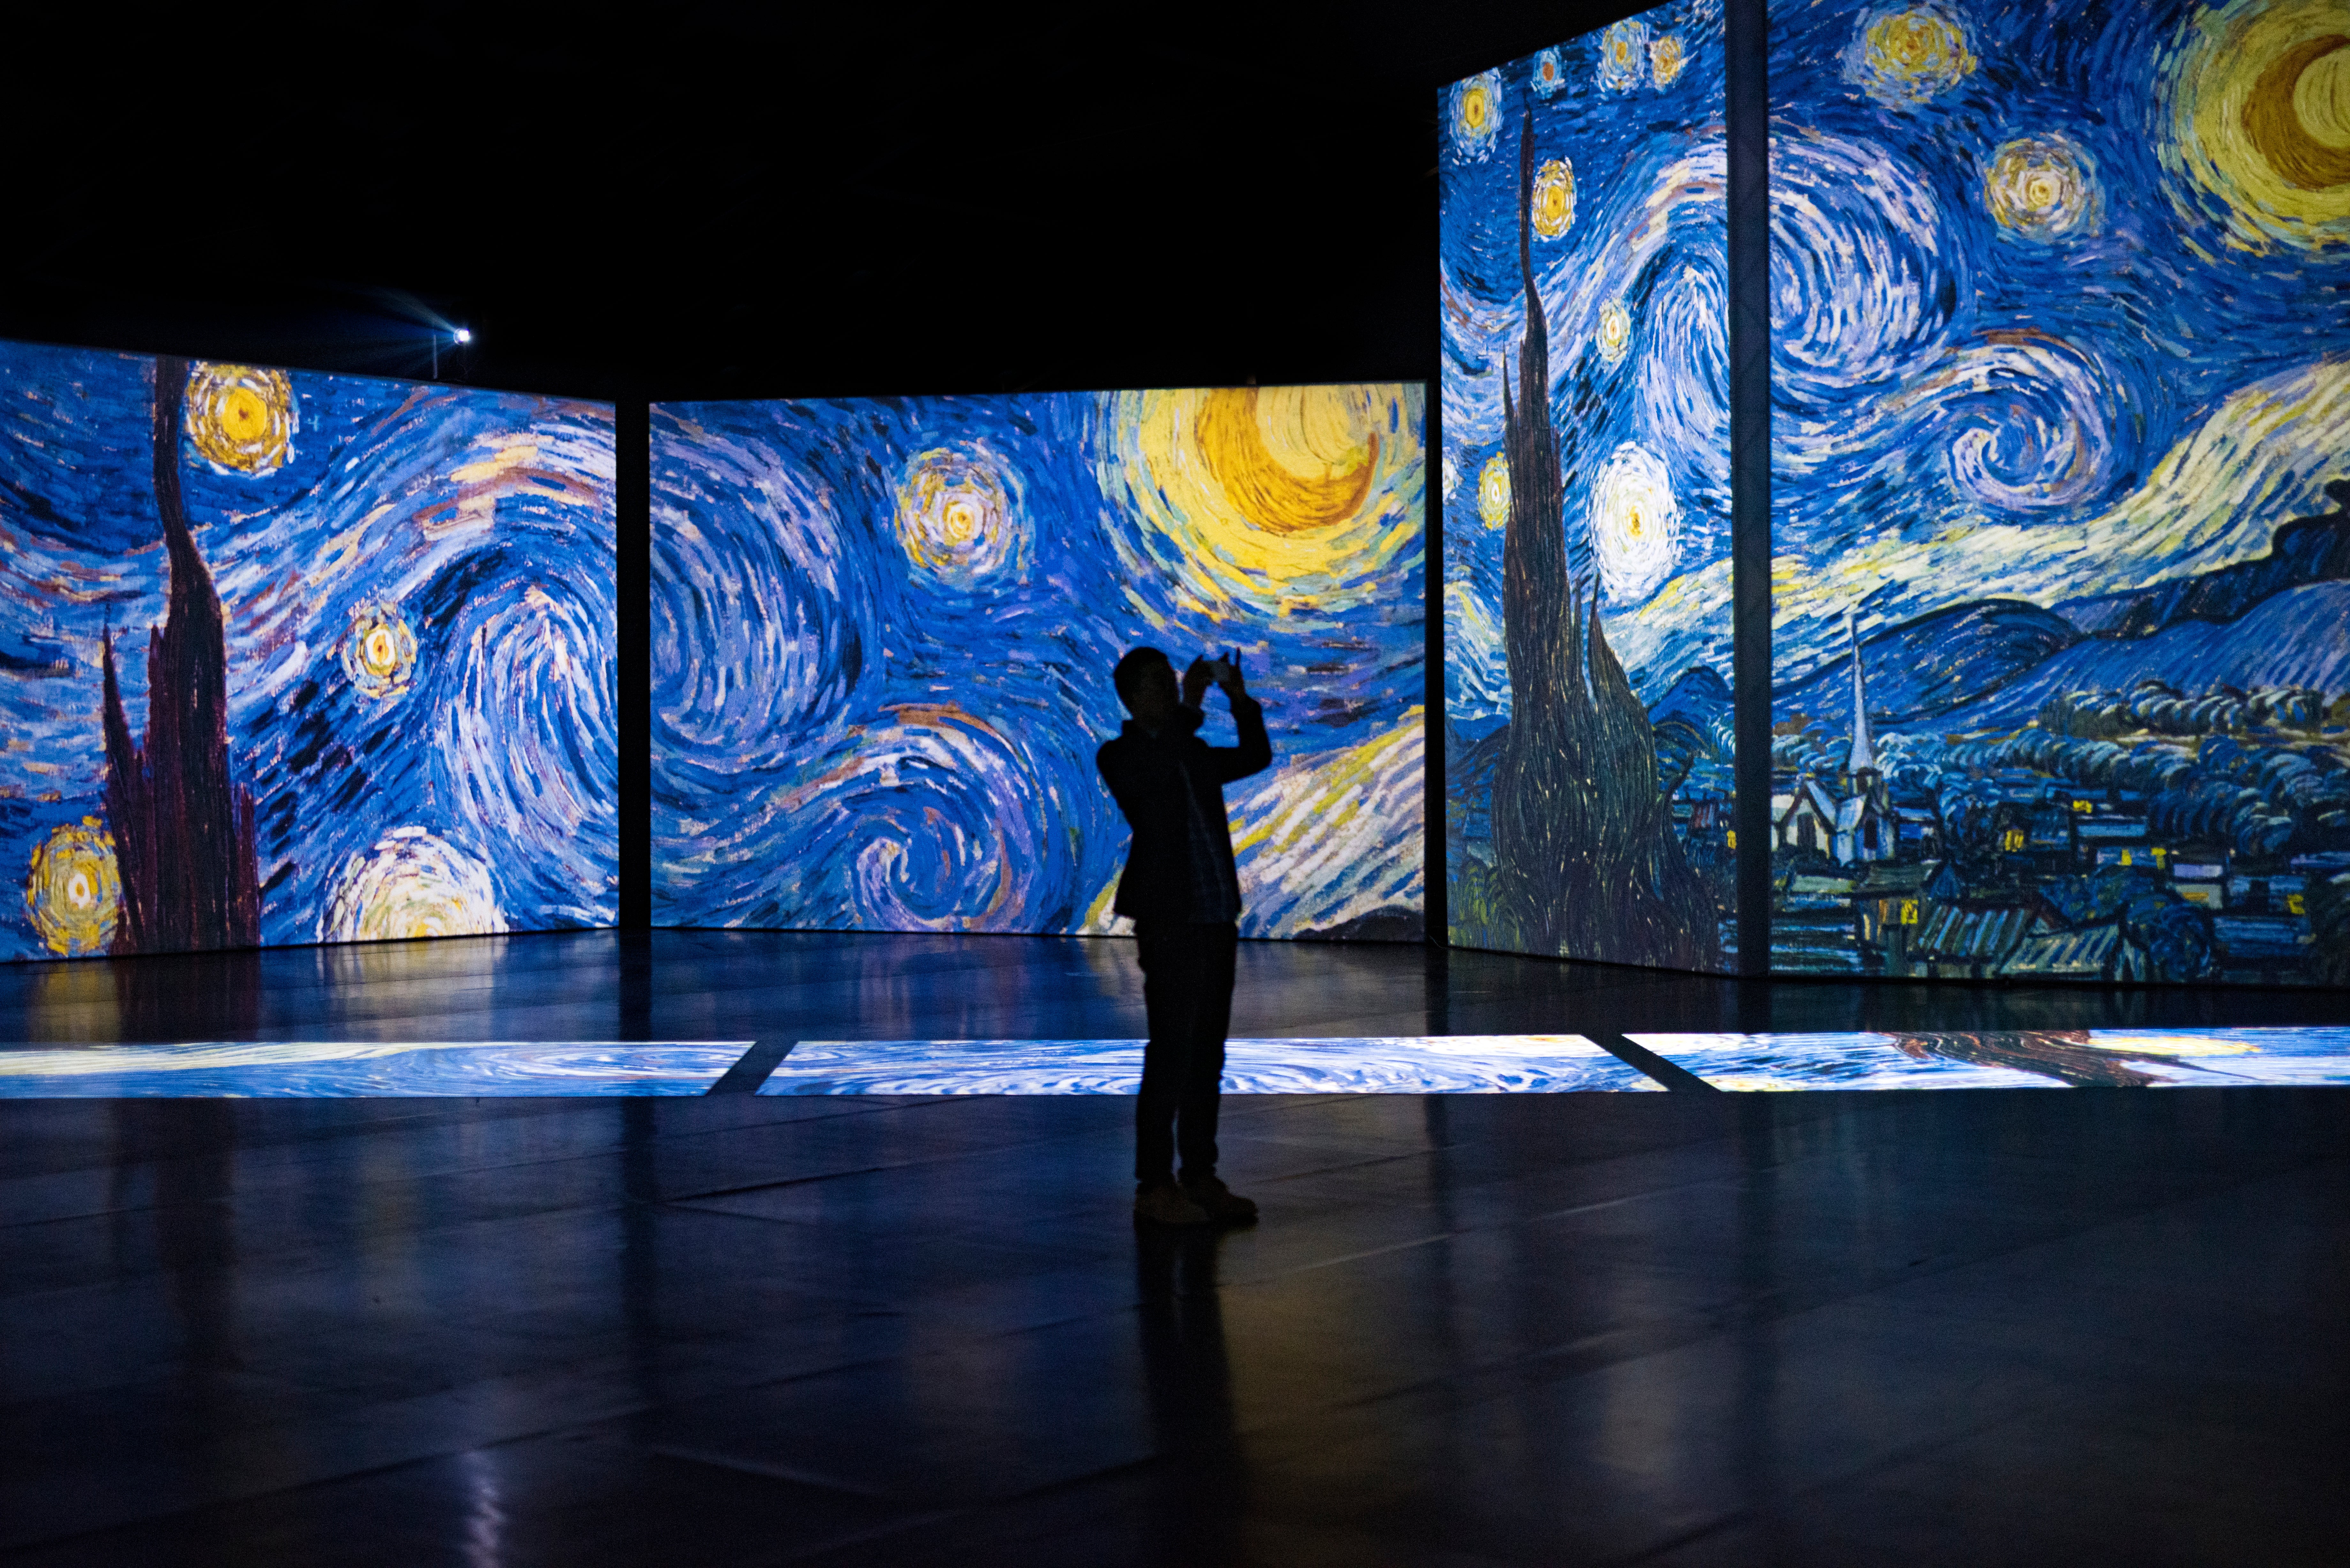 ‘Van Gogh Alive’ in London’s Kensington Gardens gives the sensation of walking right into his paintings